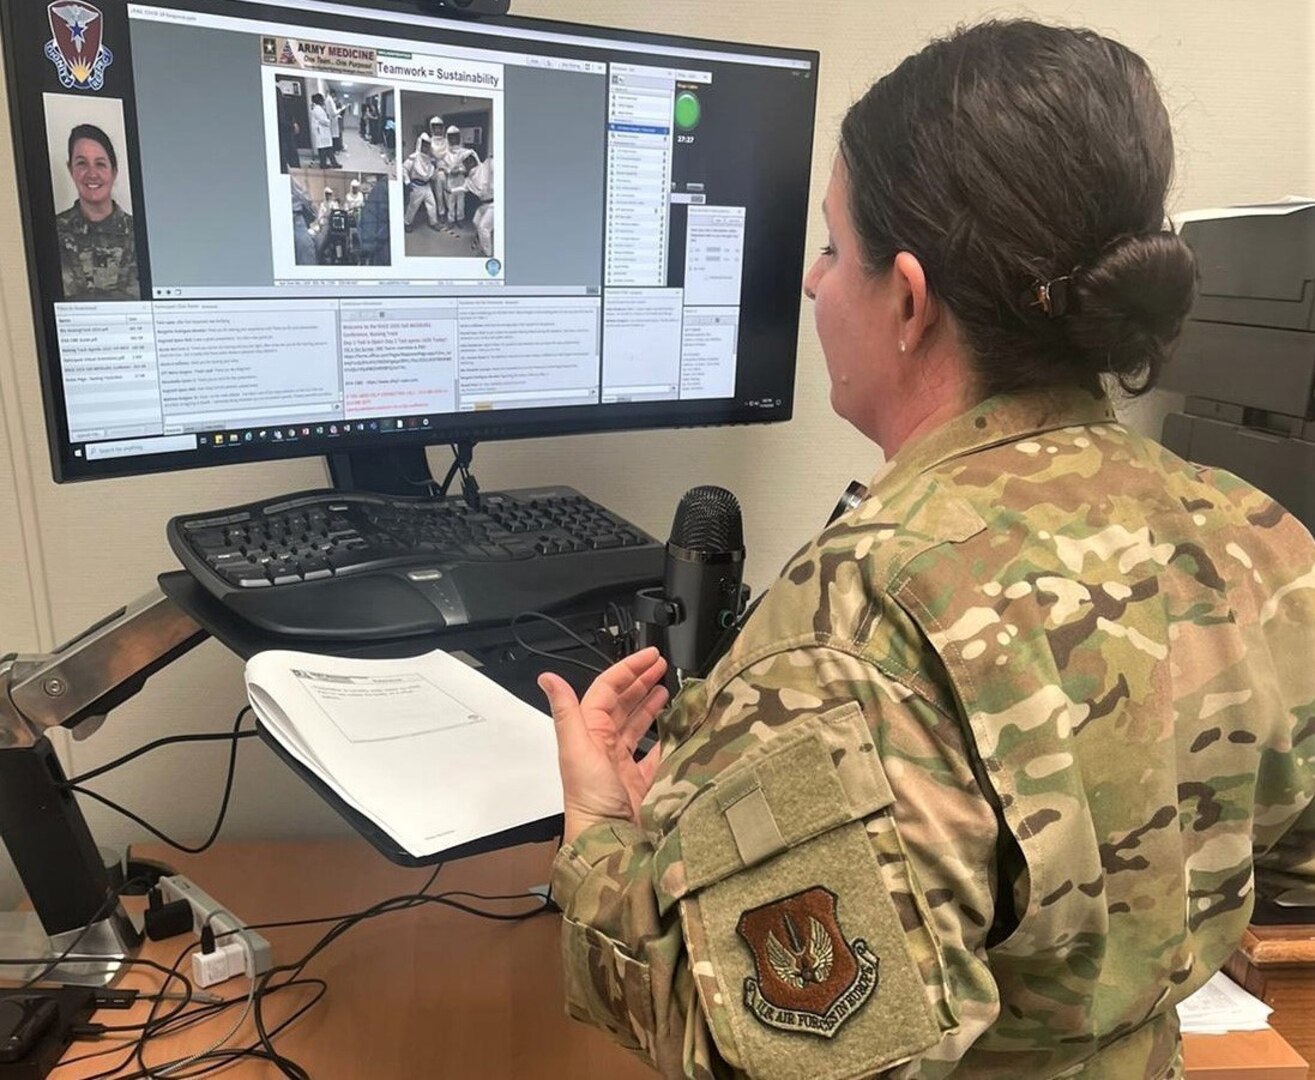 U.S. Air Force Maj. April Oliver, chief nurse in charge of the Landstuhl Regional Medical Center ICU, gives a presentation on intensive care nursing during the fall Regional Health Command Europe Medical Surgical virtual training conference held in late November.